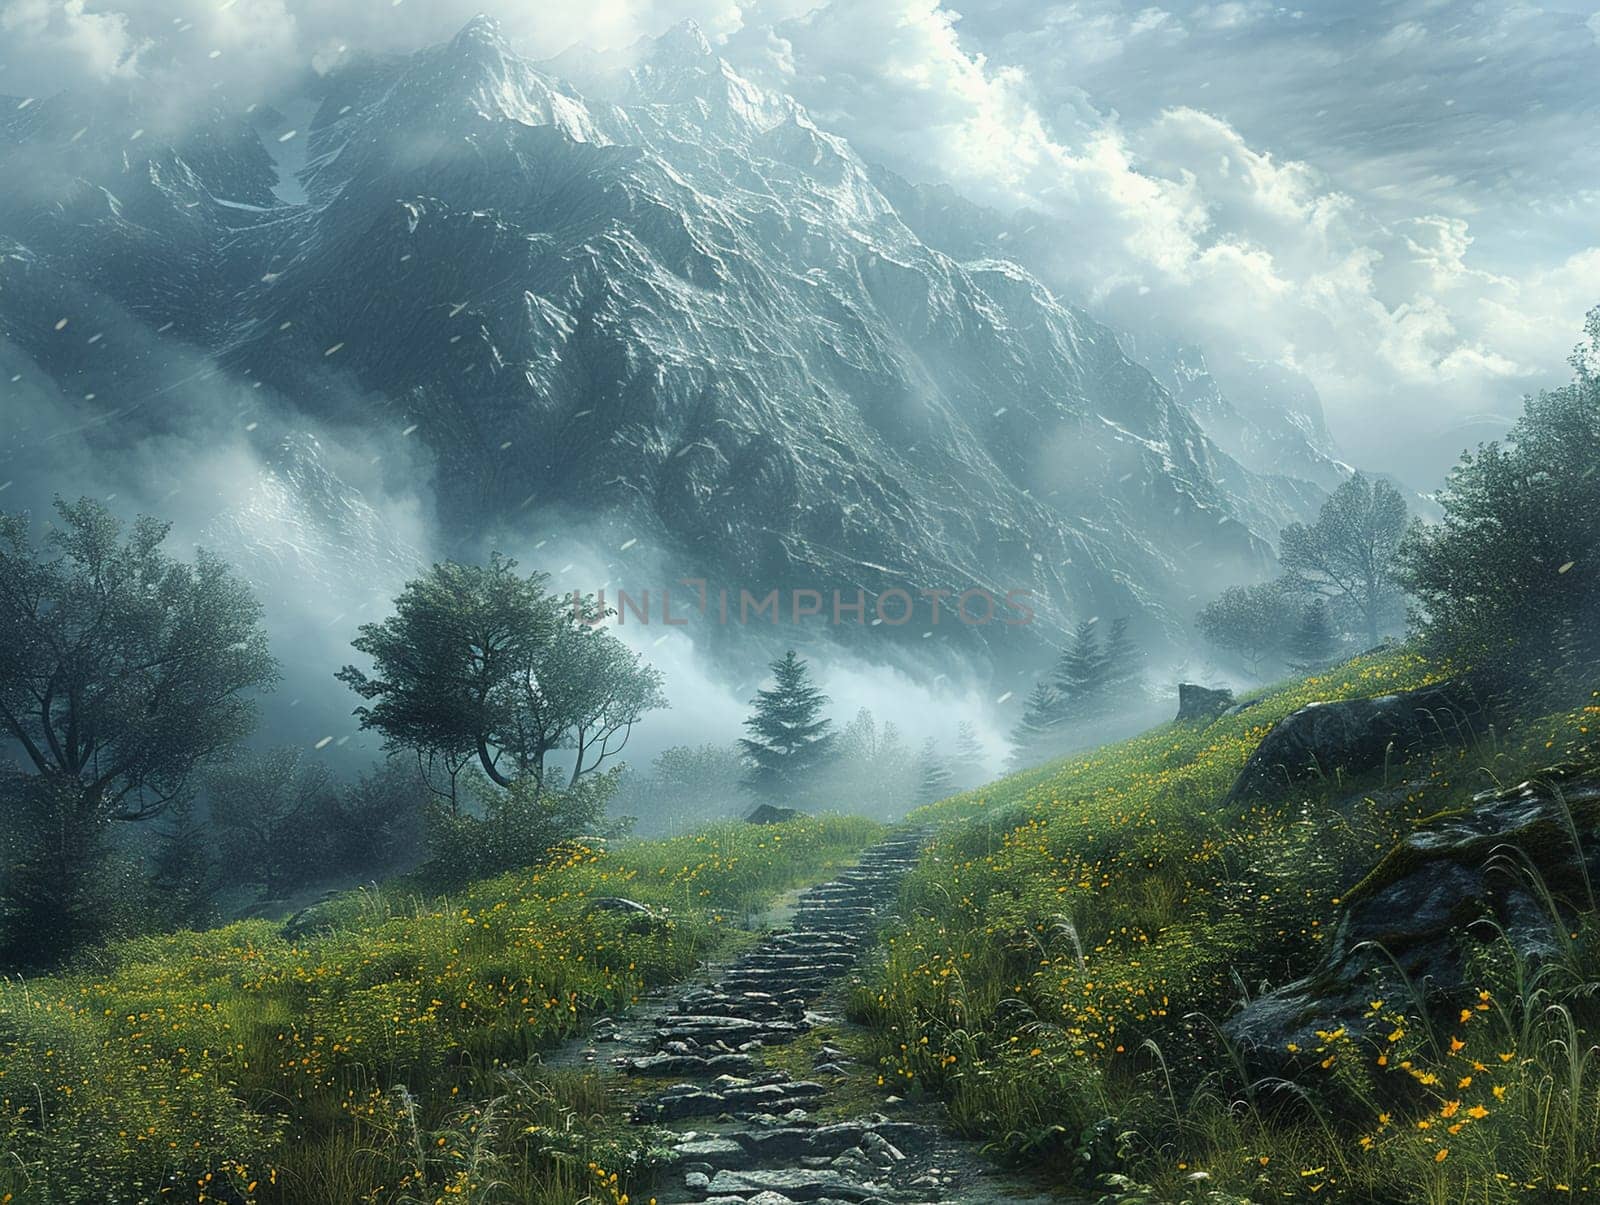 Photoshop montage of a fantasy landscape by Benzoix